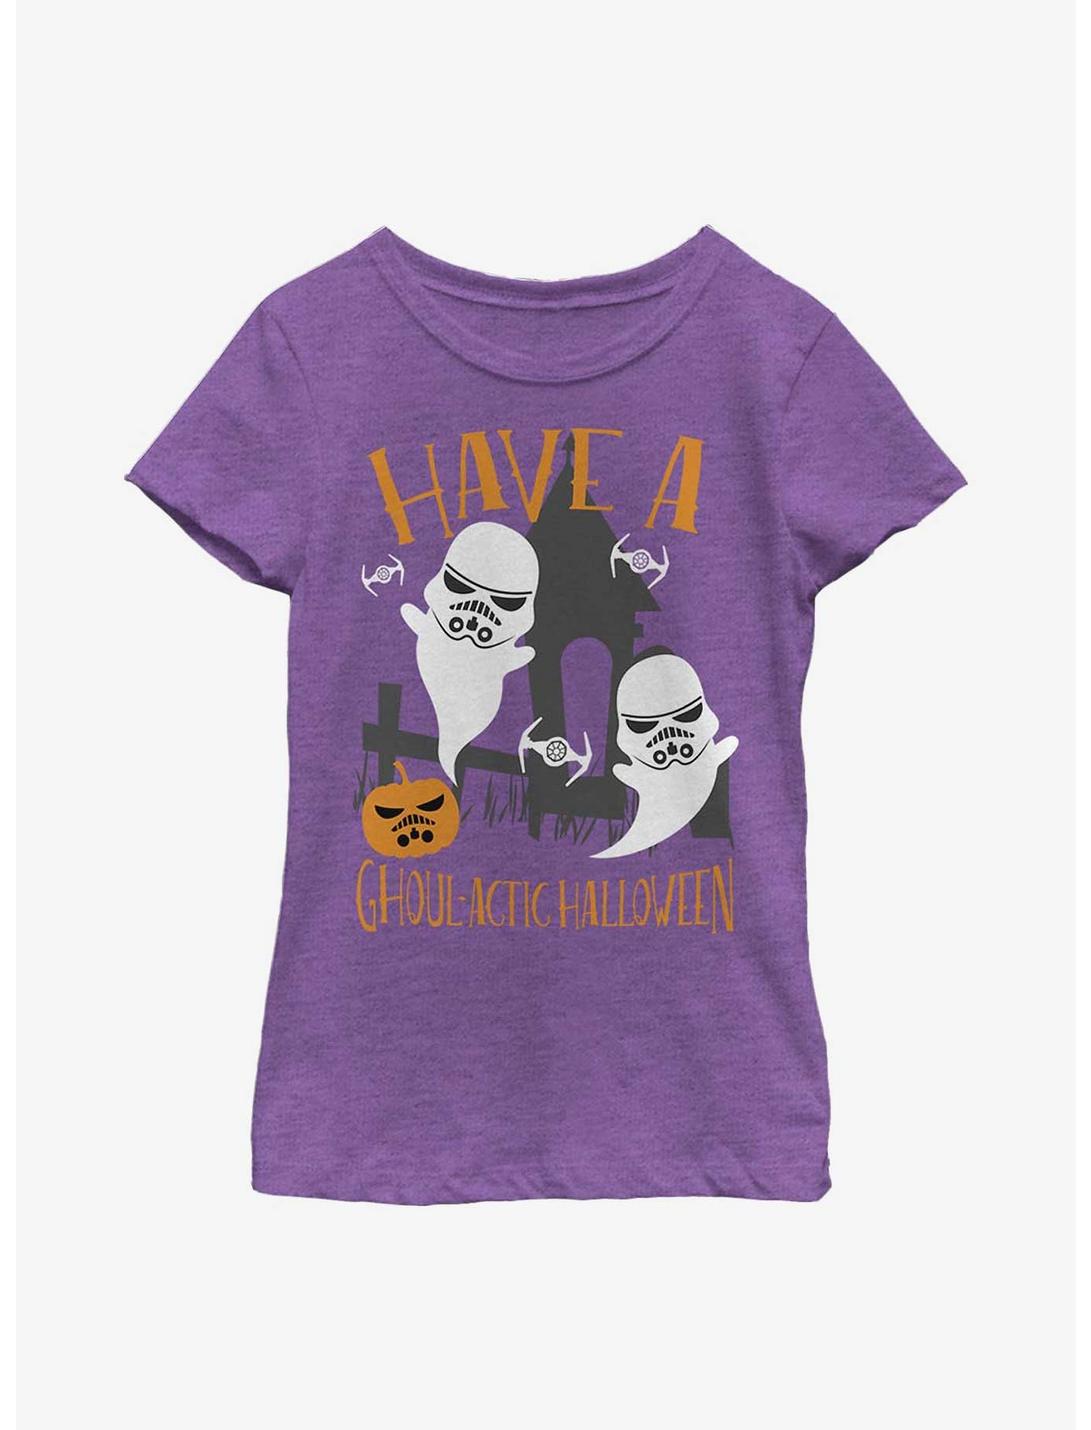 Star Wars Ghoulactic Halloween Youth Girls T-Shirt, PURPLE BERRY, hi-res